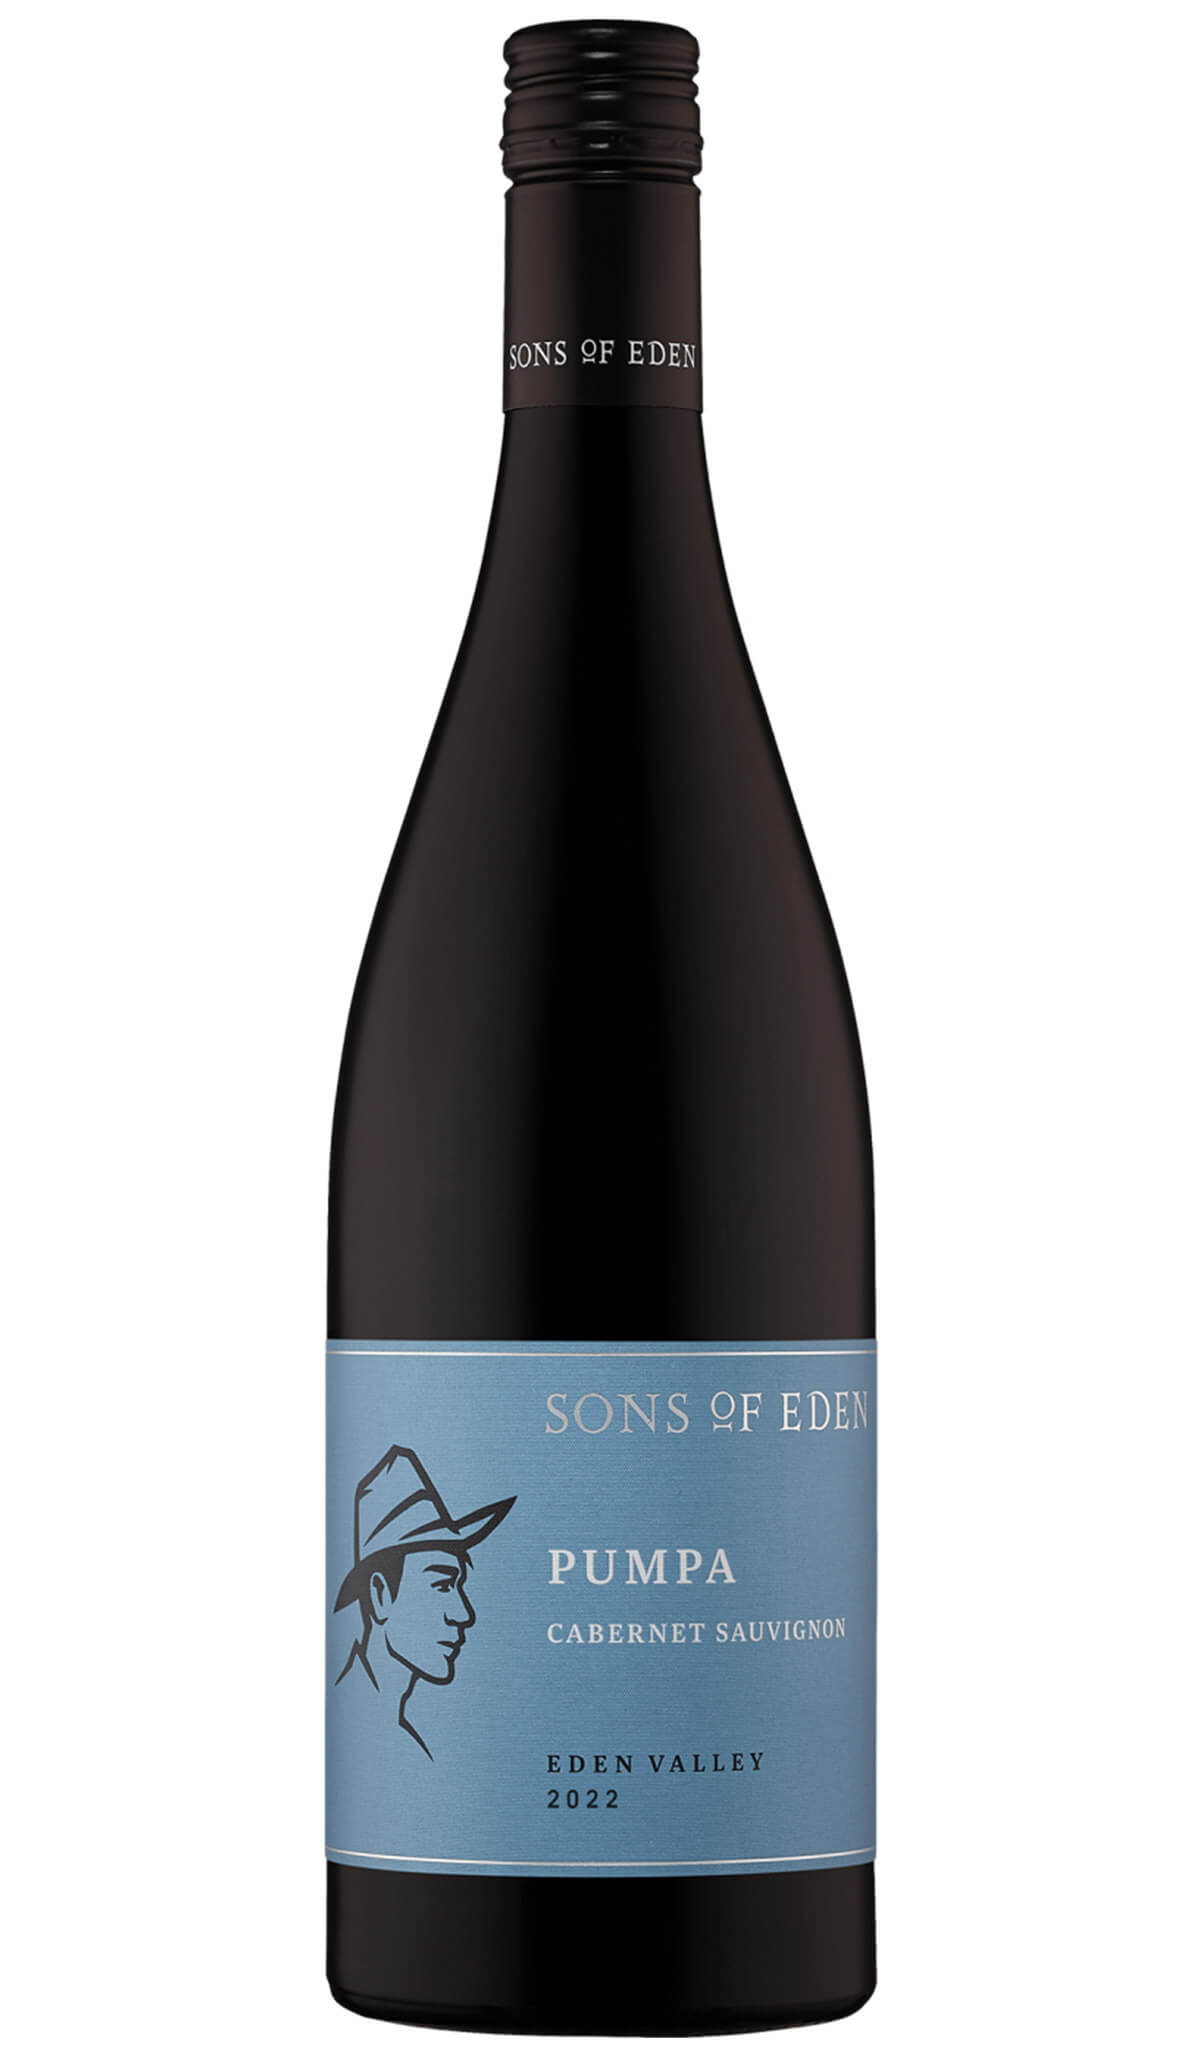 Find out more or buy Sons of Eden Pumpa Cabernet 2022 (Eden Valley) online at Wine Sellers Direct - Australia’s independent liquor specialists.